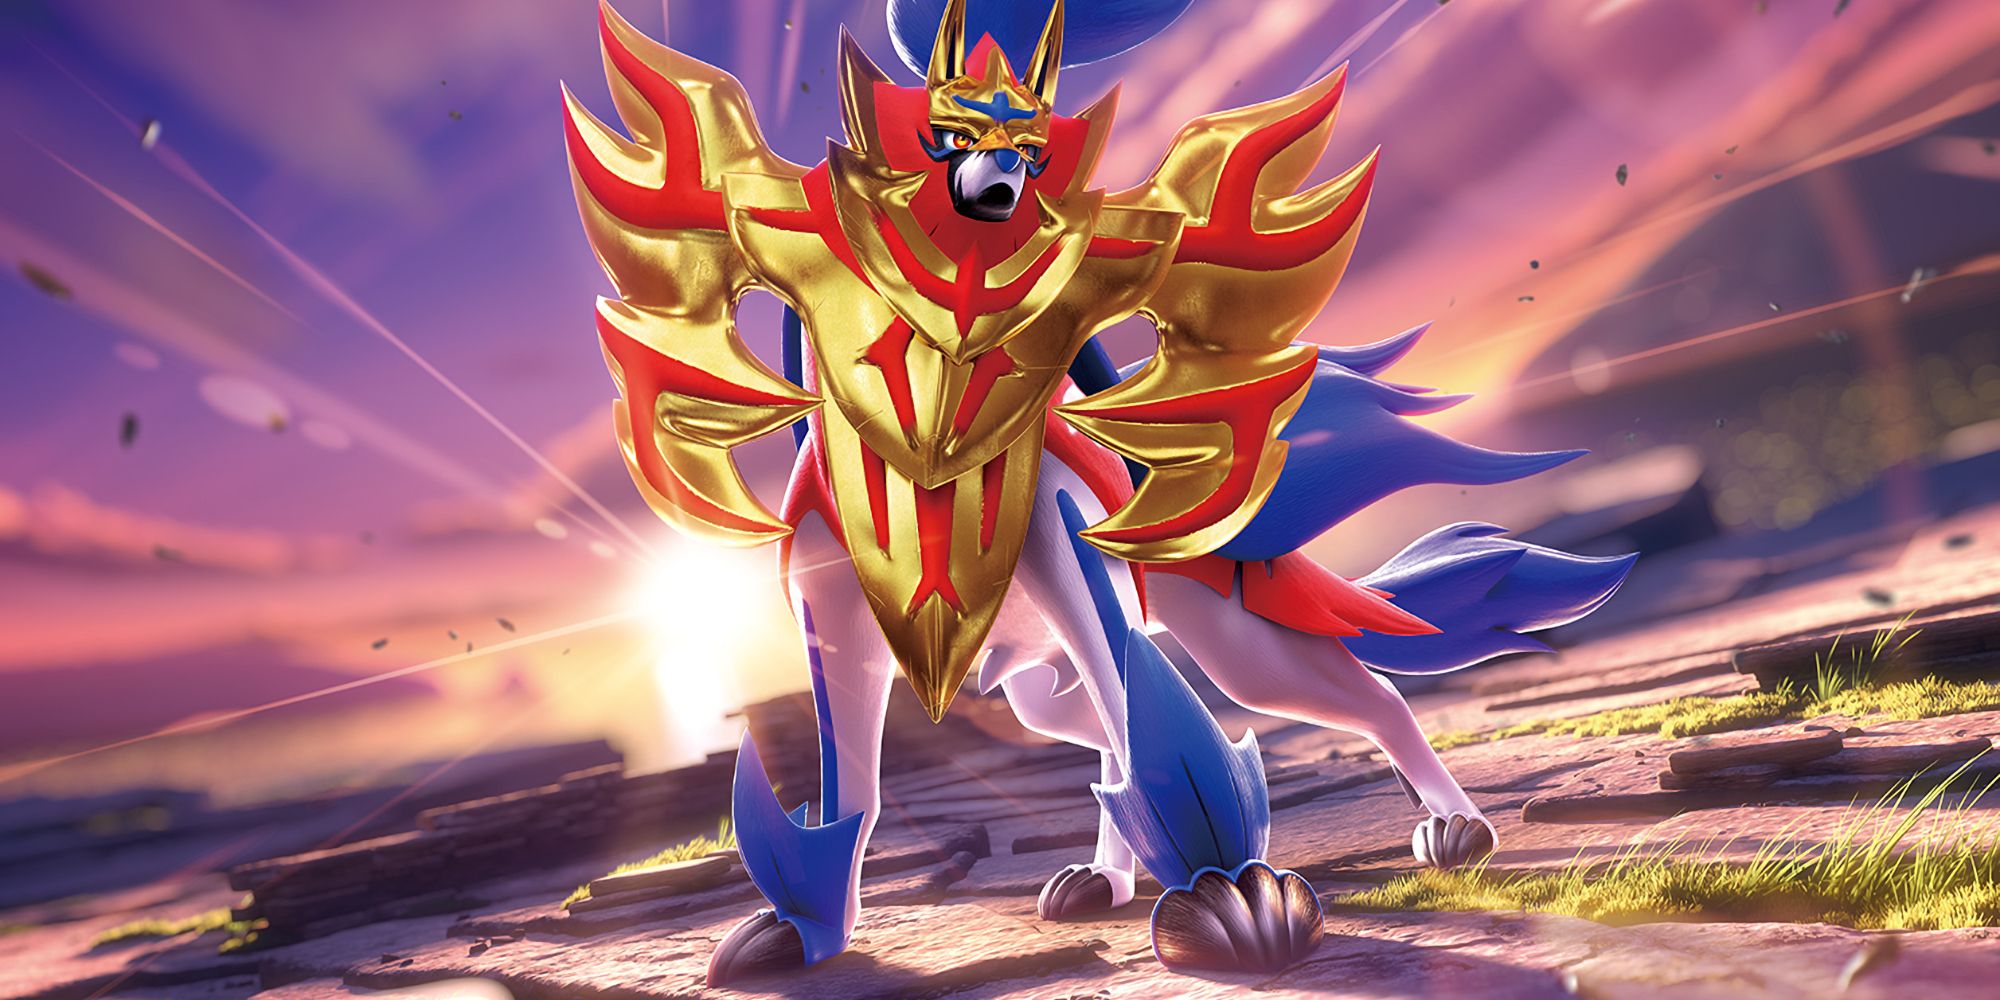 Artwork from the Pokémon TCG showing Zamazenta in its Crown Shield from illuminated from behind by the sunset.